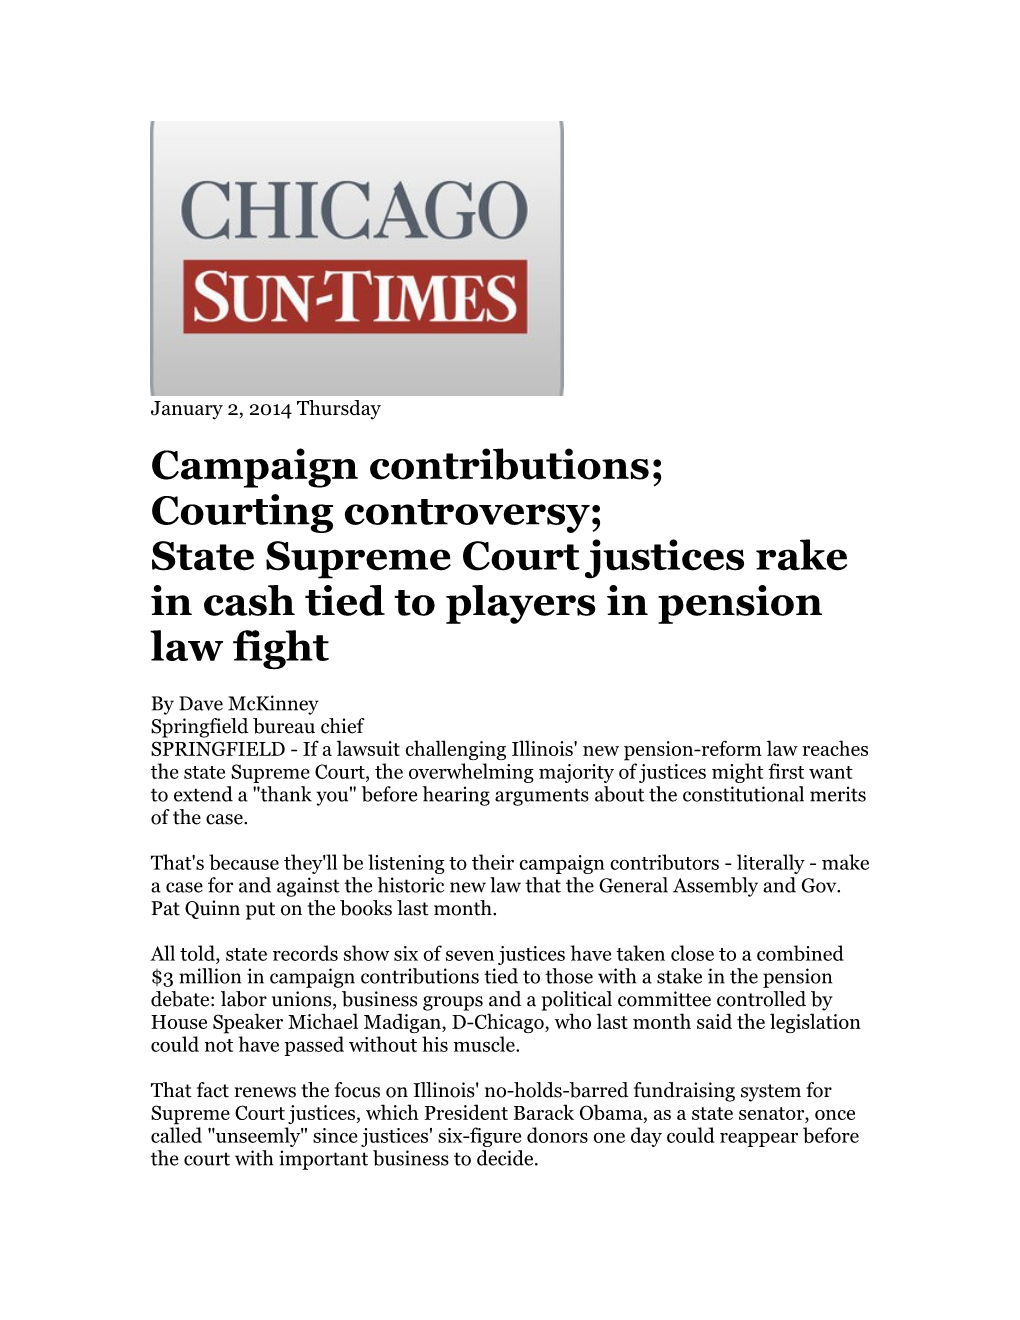 State Supreme Court Justices Rake in Cash Tied to Players in Pension Law Fight